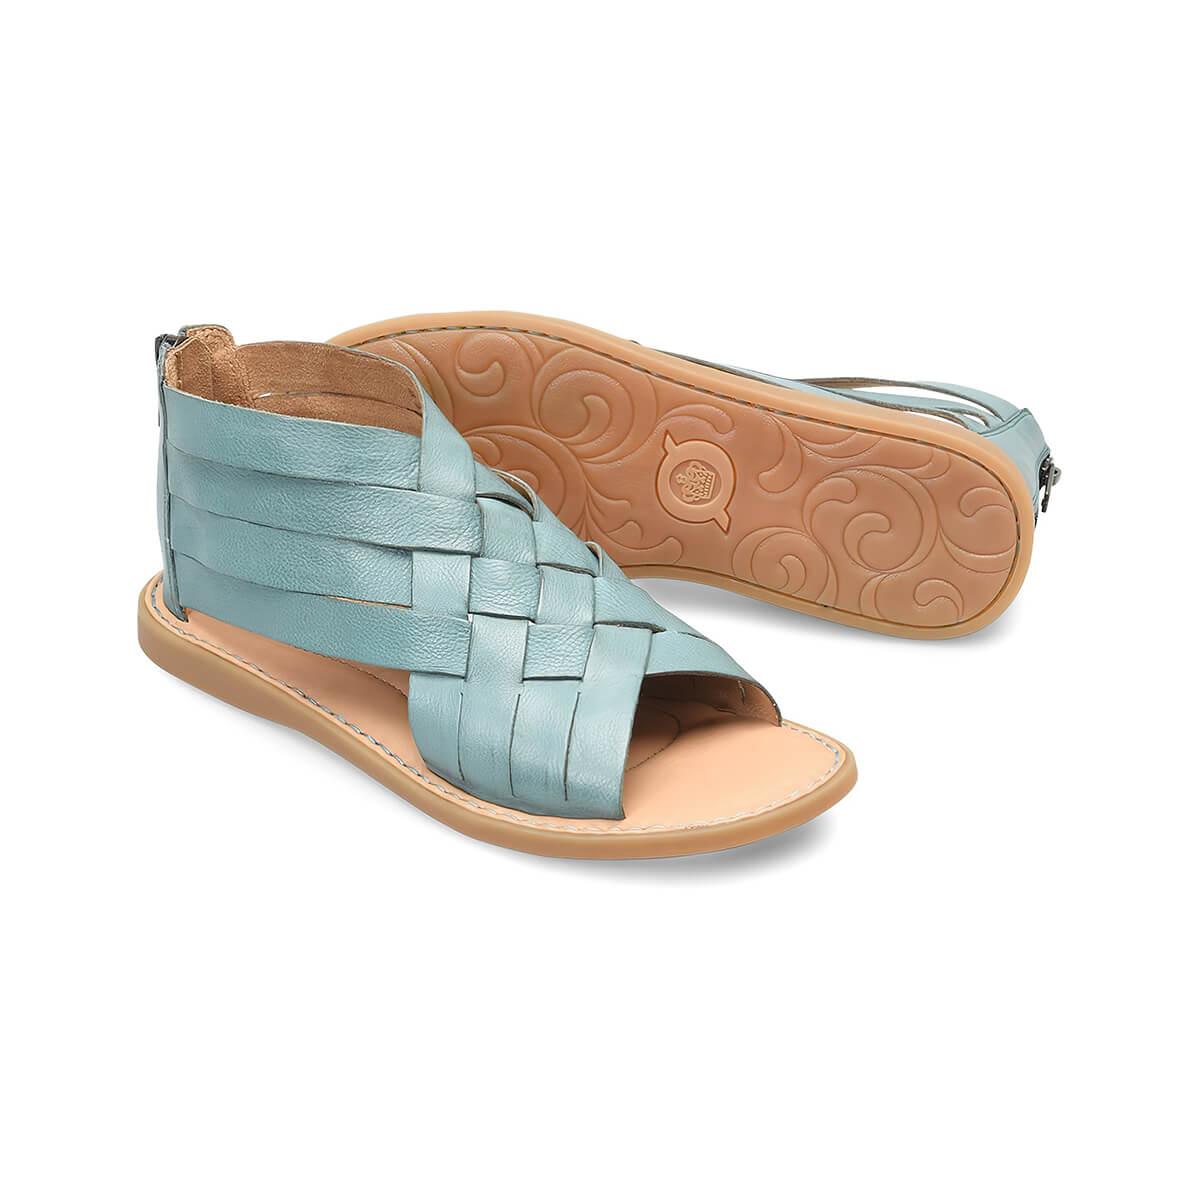  Women's Iwa Woven Leather Sandals